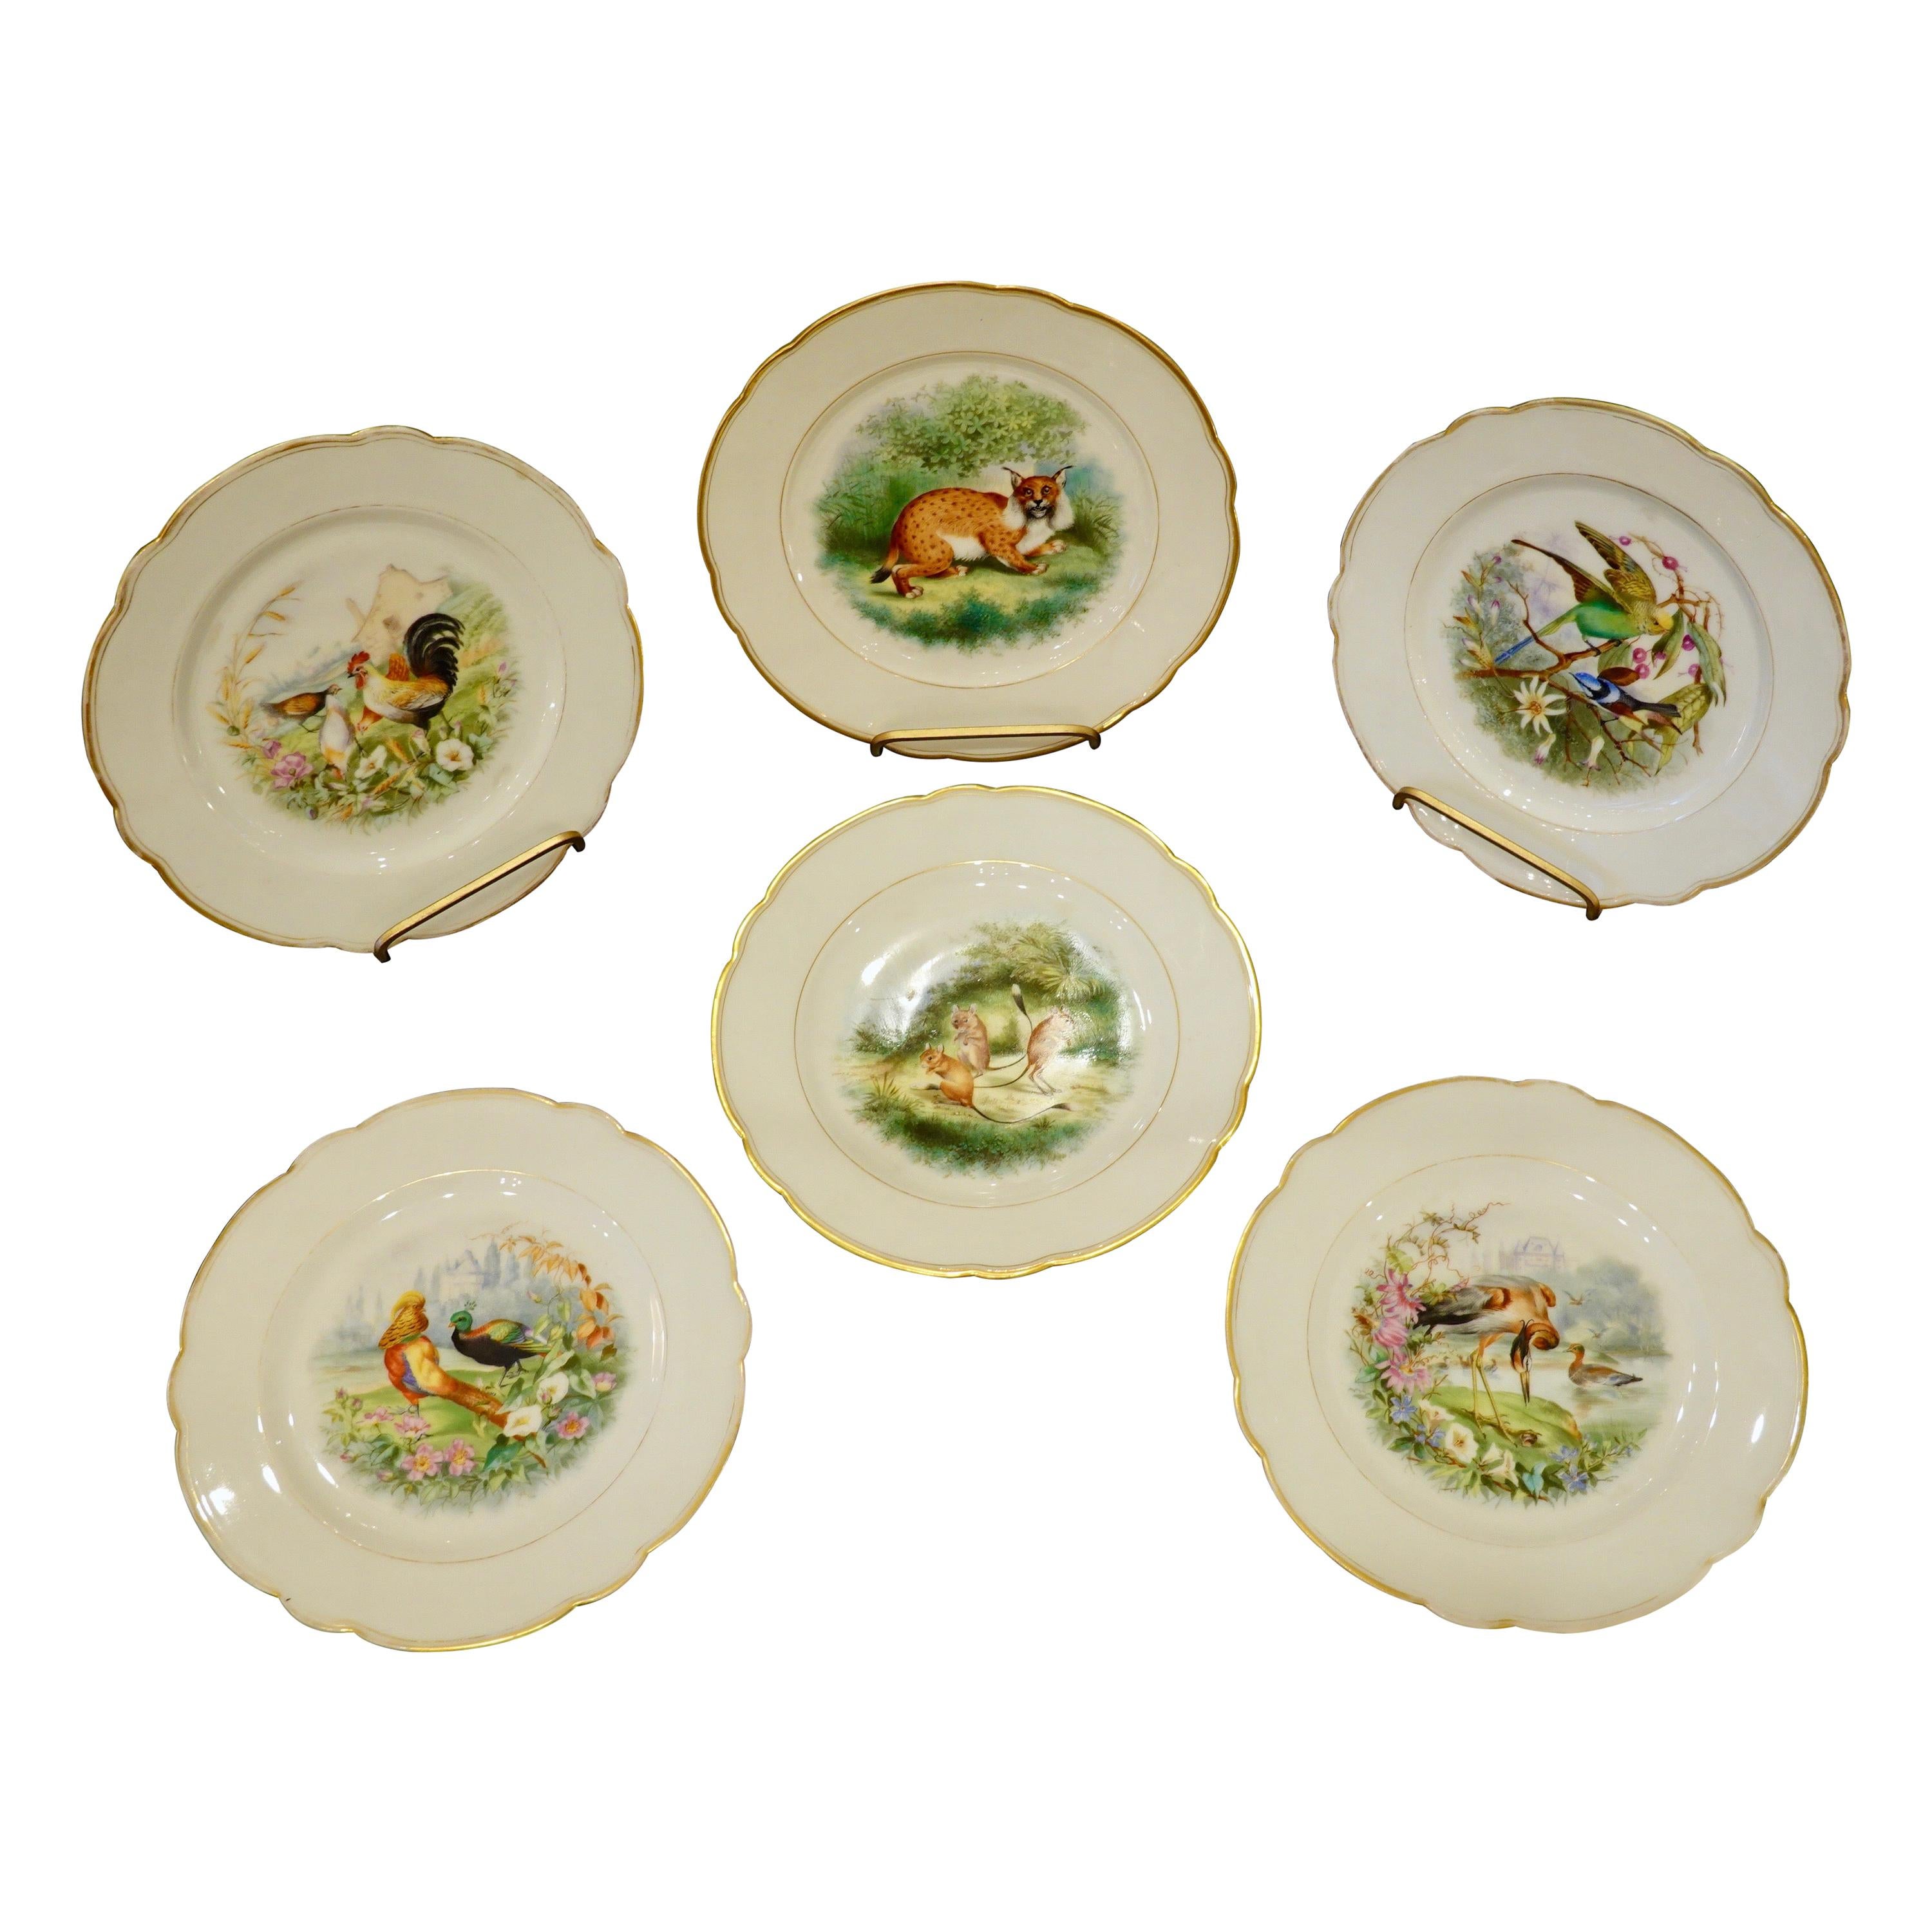 Set of Six Paris Porcelain Fruit Plates with Hand-Painted Scenes of Animals